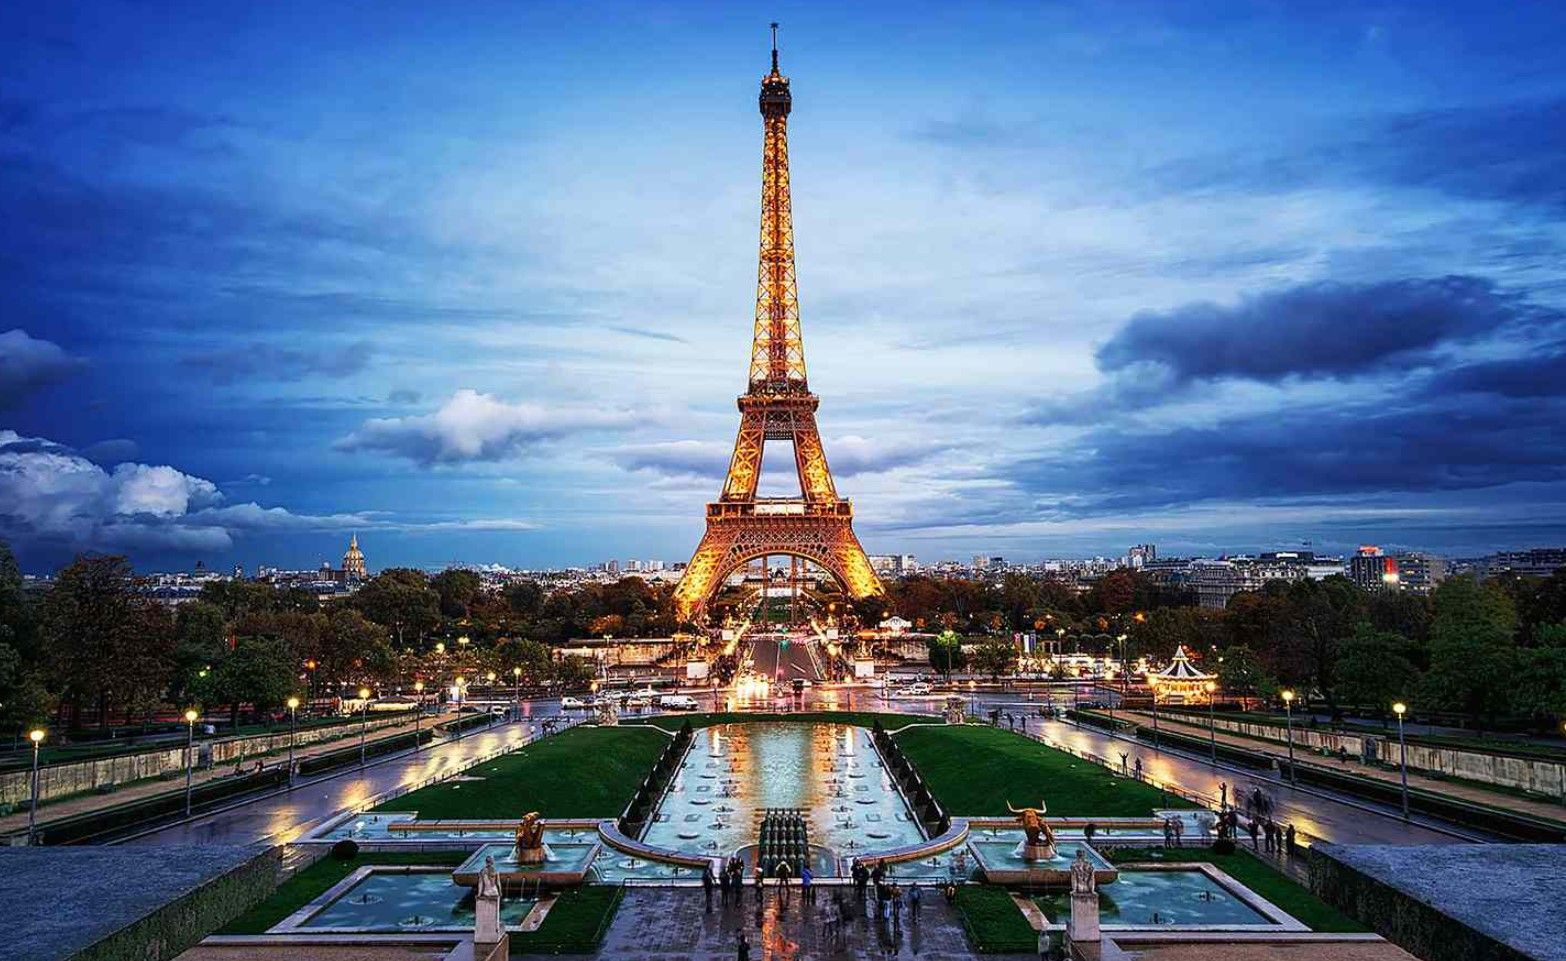 Eiffel Tower- Things To Do at Champ de Mars Arena Paris Olympics 2024 | Top Attractions, Night Life, Restaurants